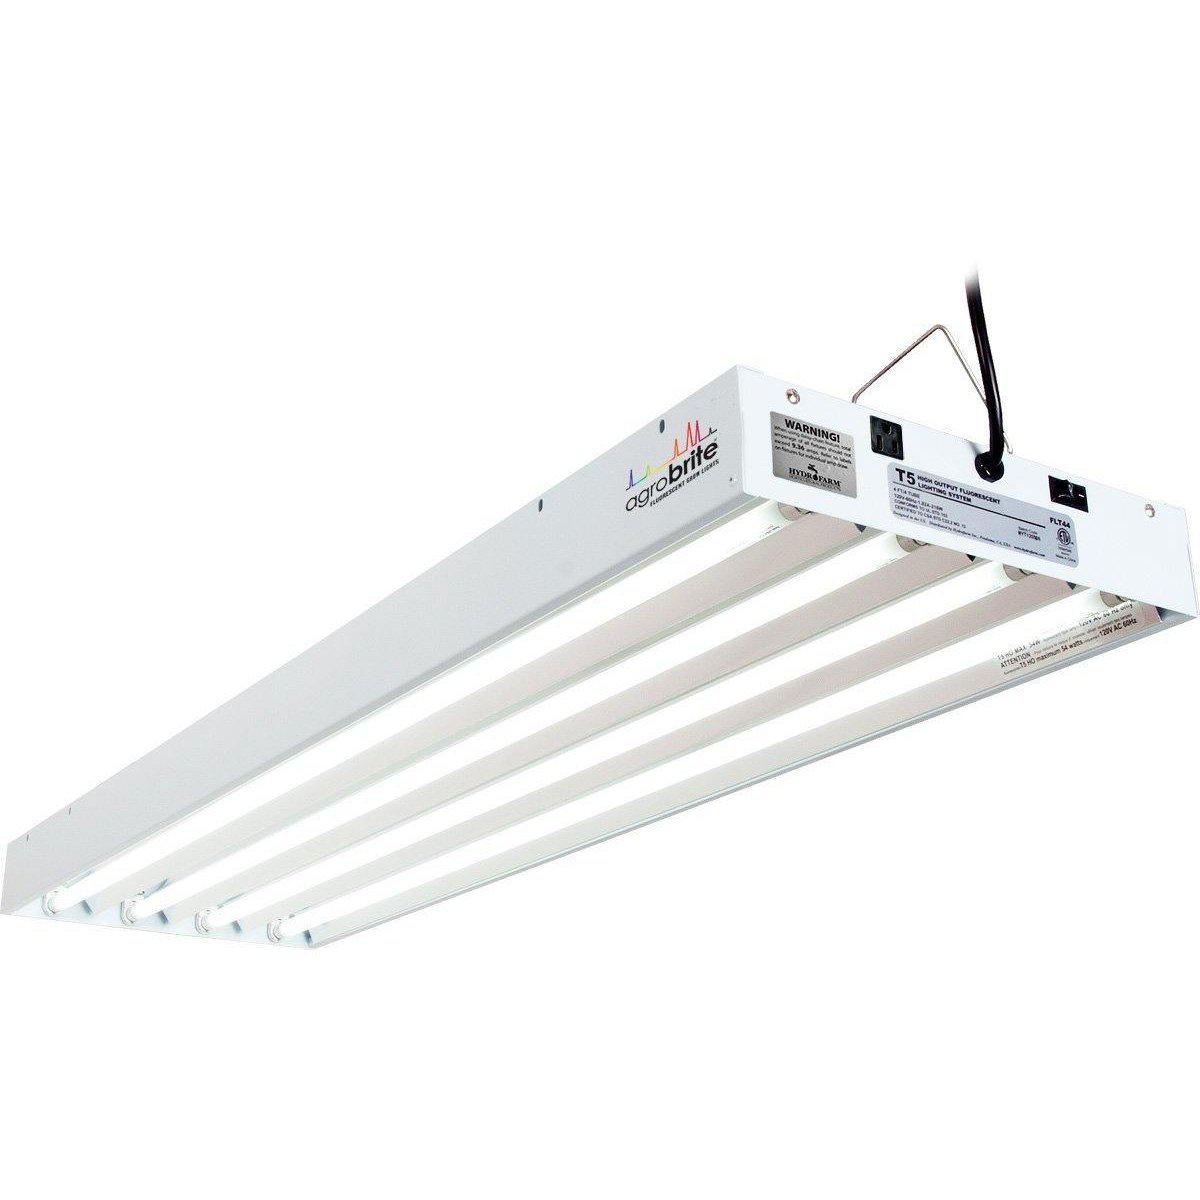 AgroBrite - T5 216W, 4', 4 Tube Fixture with Lamps